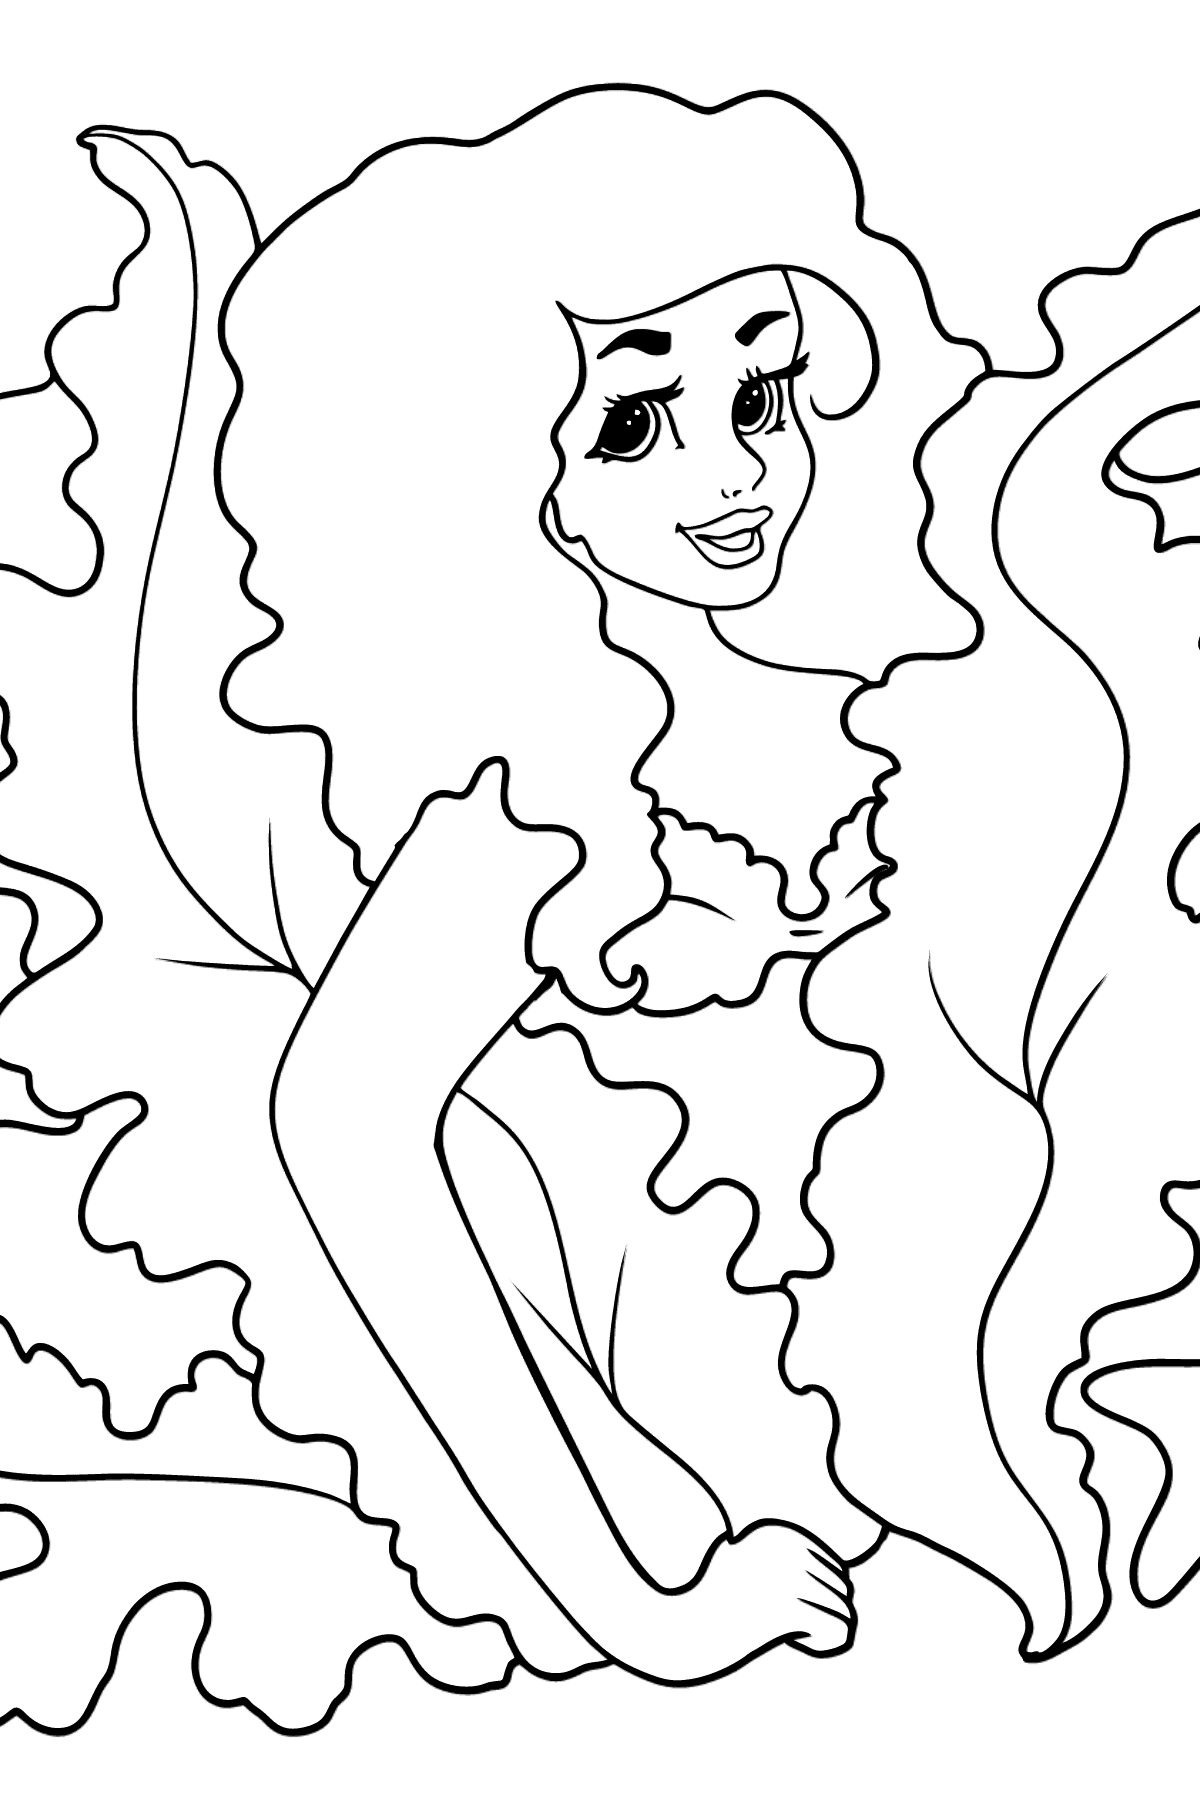 Coloring Page Mermaid and starfish - Coloring Pages for Kids